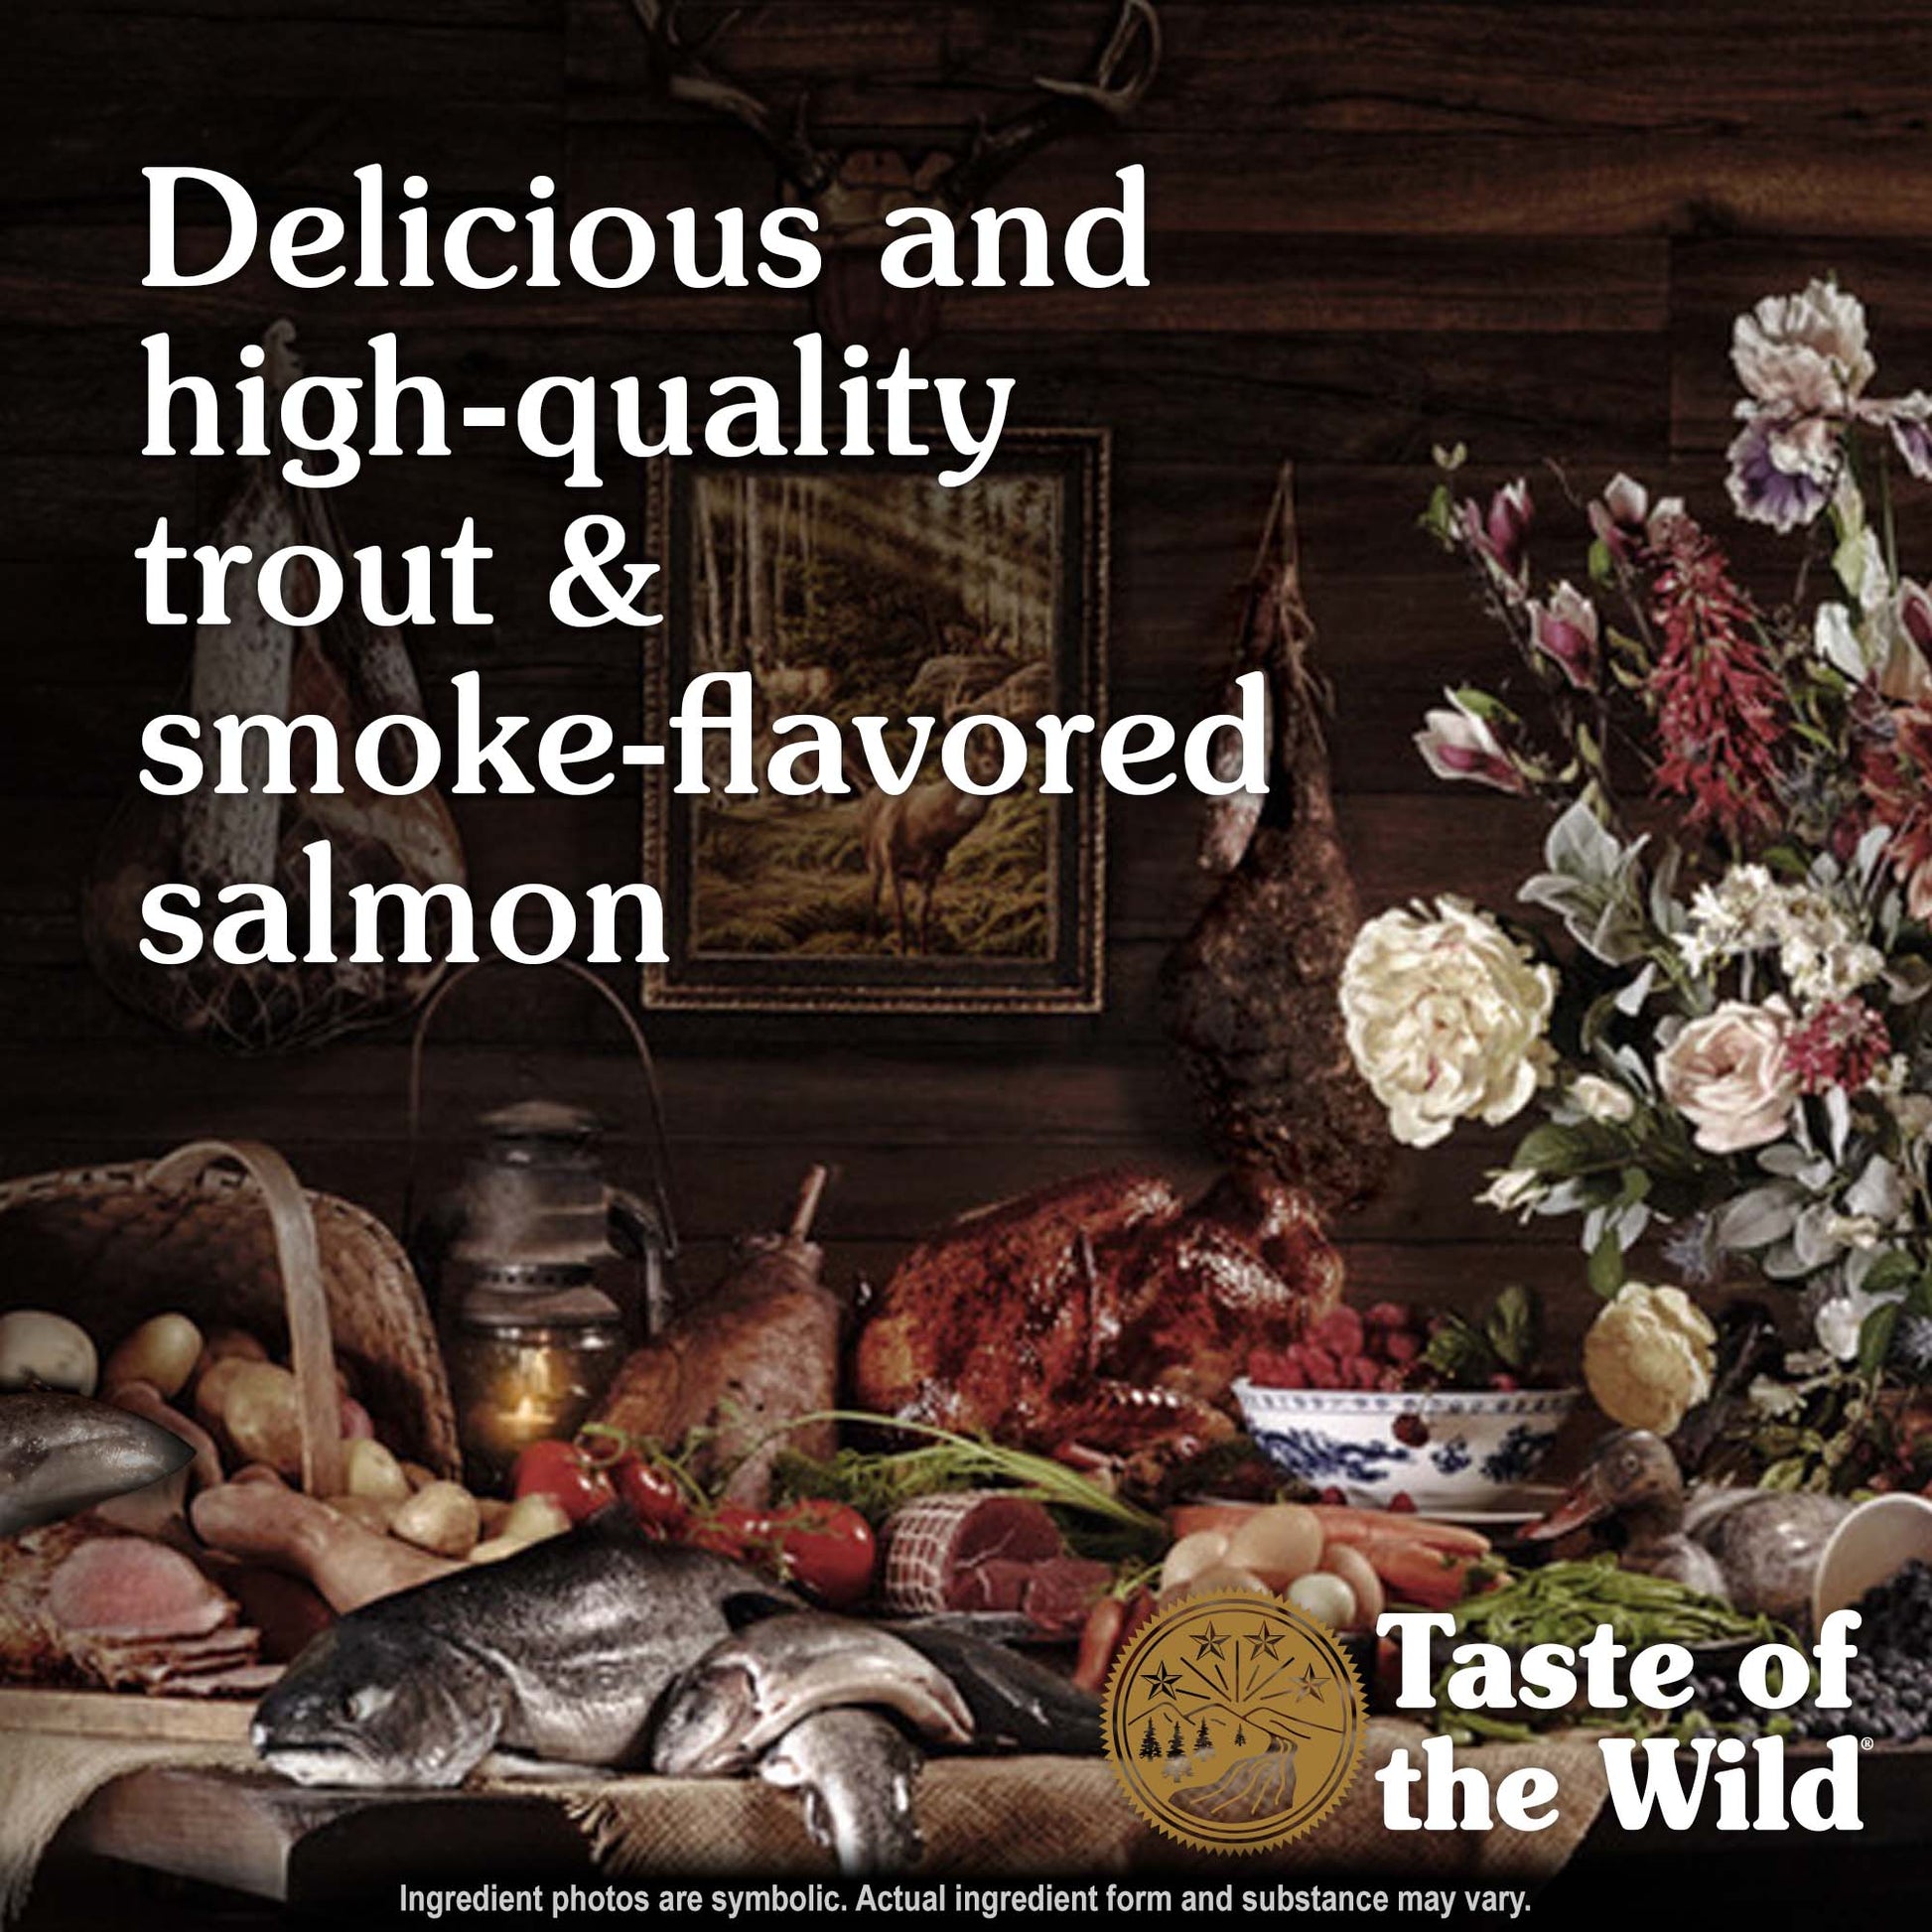 Taste of the Wild Canyon River Feline Recipe for Cats